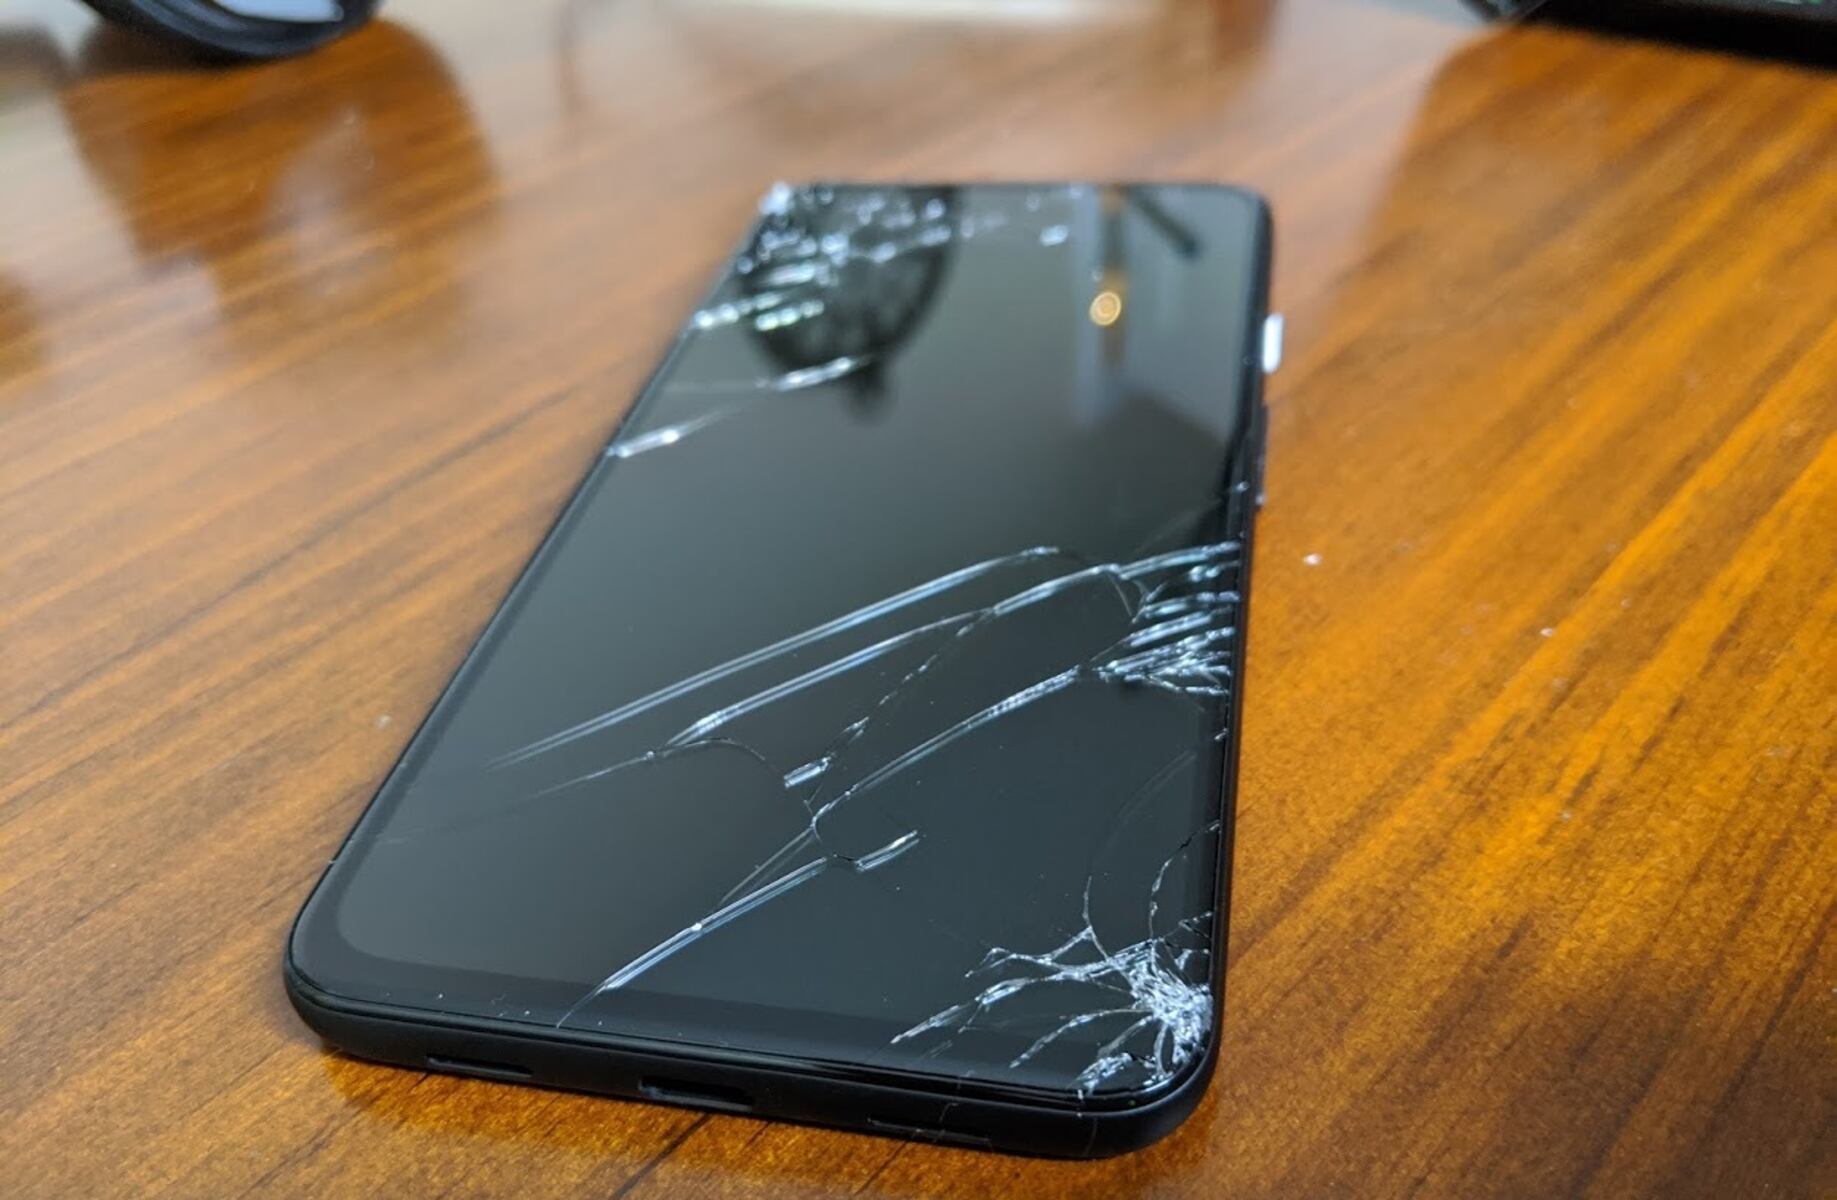 Troubleshooting: Factory Reset For Pixel 4A With A Broken Screen